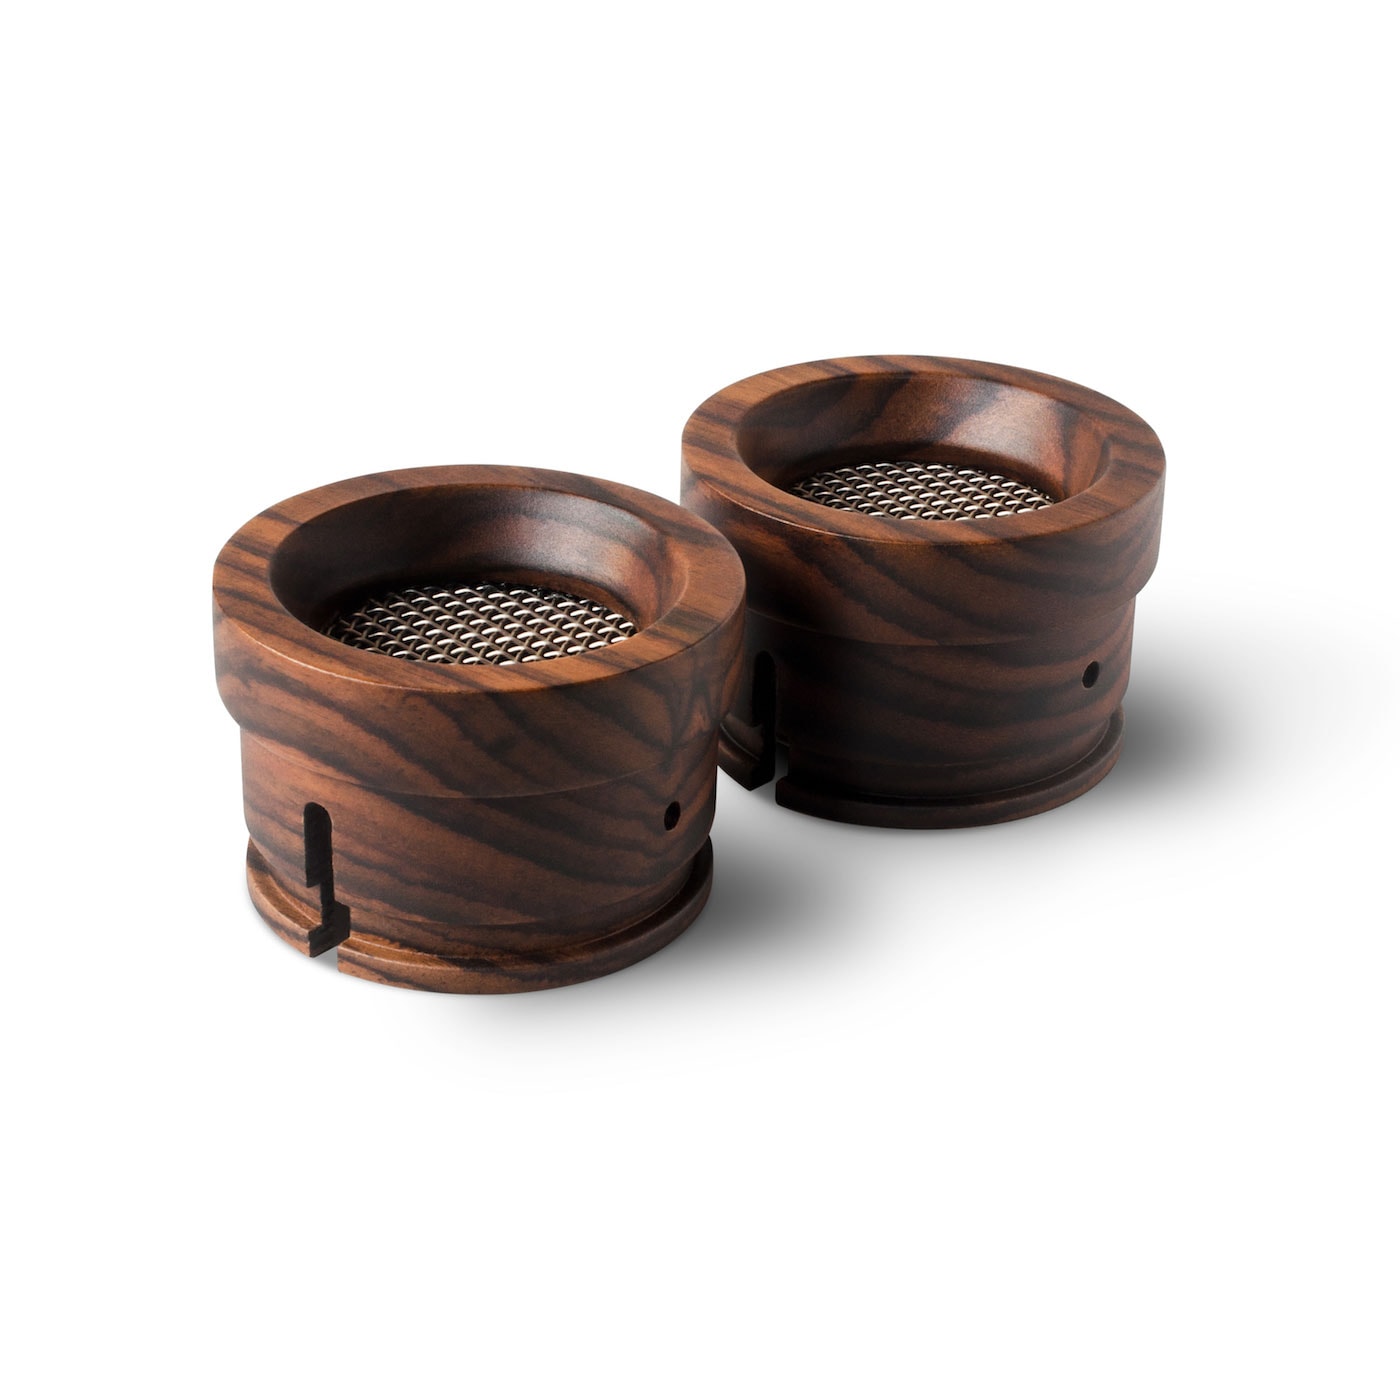 Striped-Rosewood-Cups-01.jpg